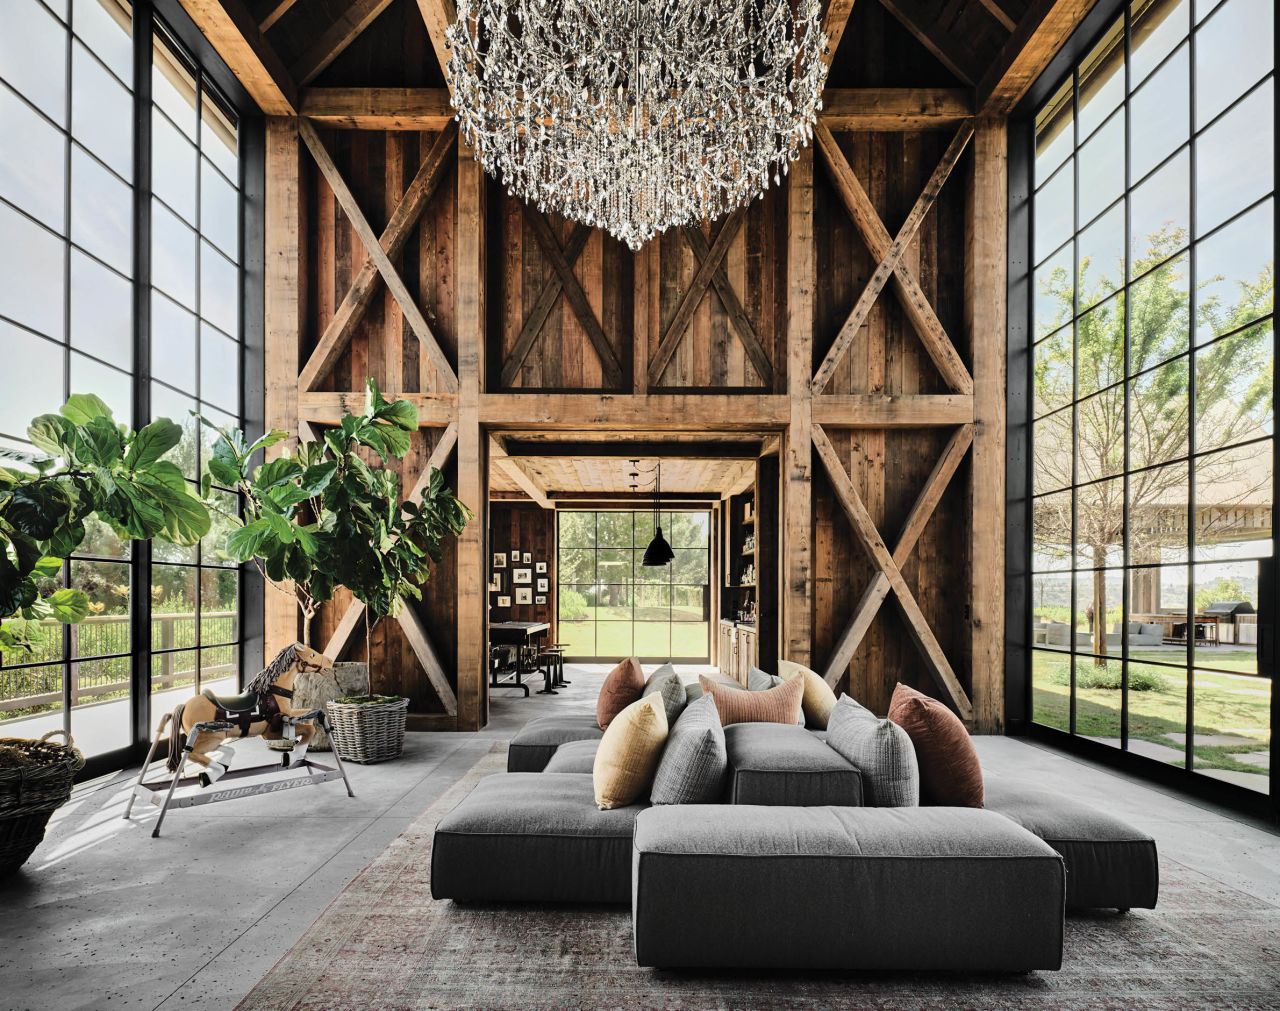 A 10-foot-tall chandelier hangs in the property's guest barn.